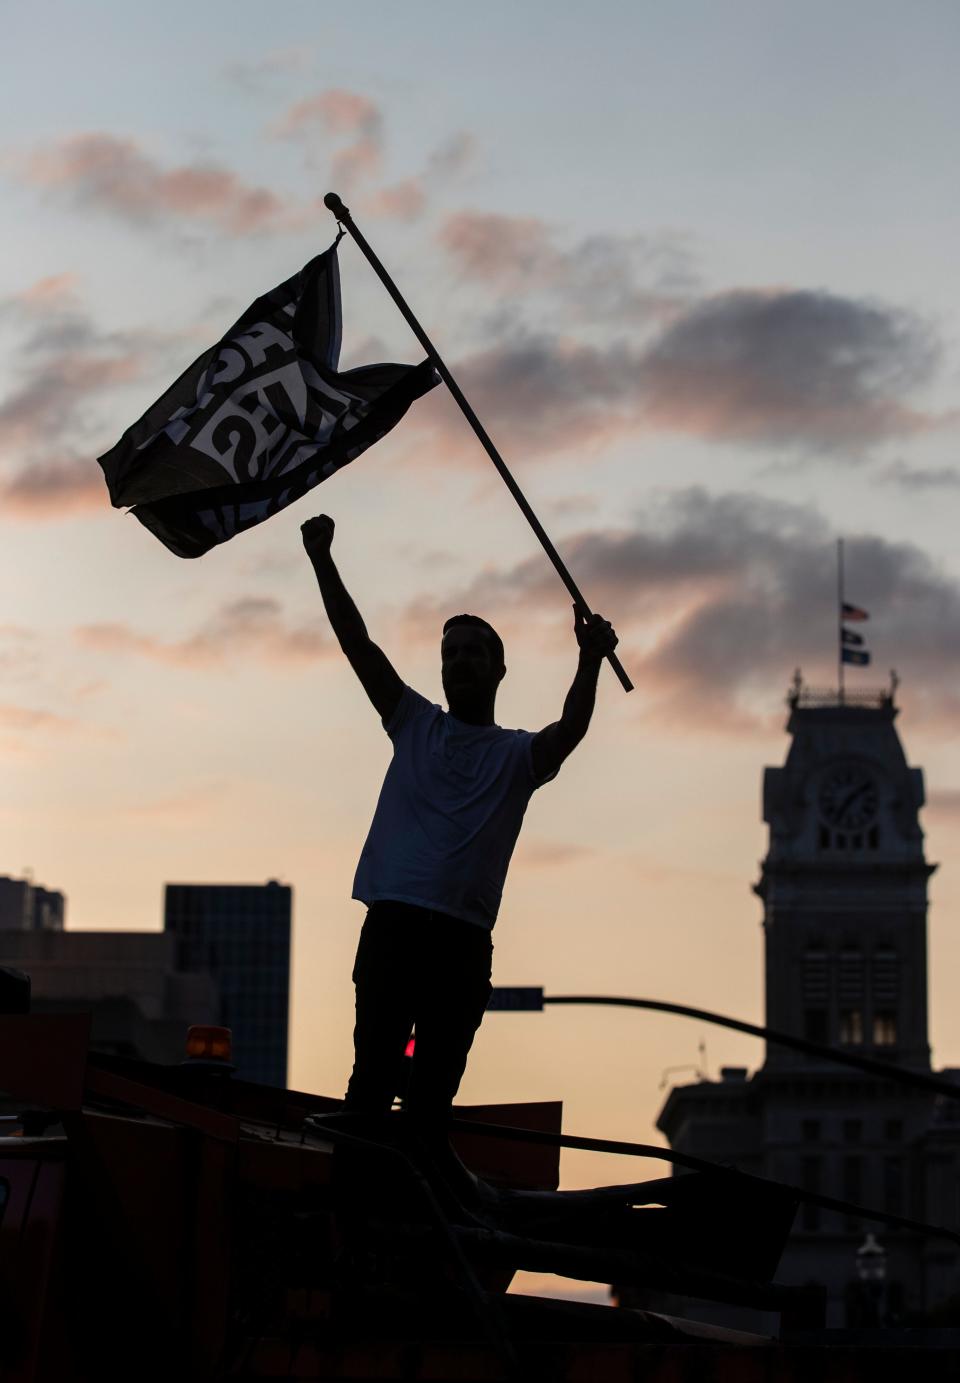 Dylan O'Donoghue stood atop a barricade at Fifth and Jefferson Streets in Louisville, Kentucky and waved a Black Lives Matter flag. Protesters marched through the streets for another night, demonstrating for justice for the late Breonna Taylor. Sept. 26, 2020.